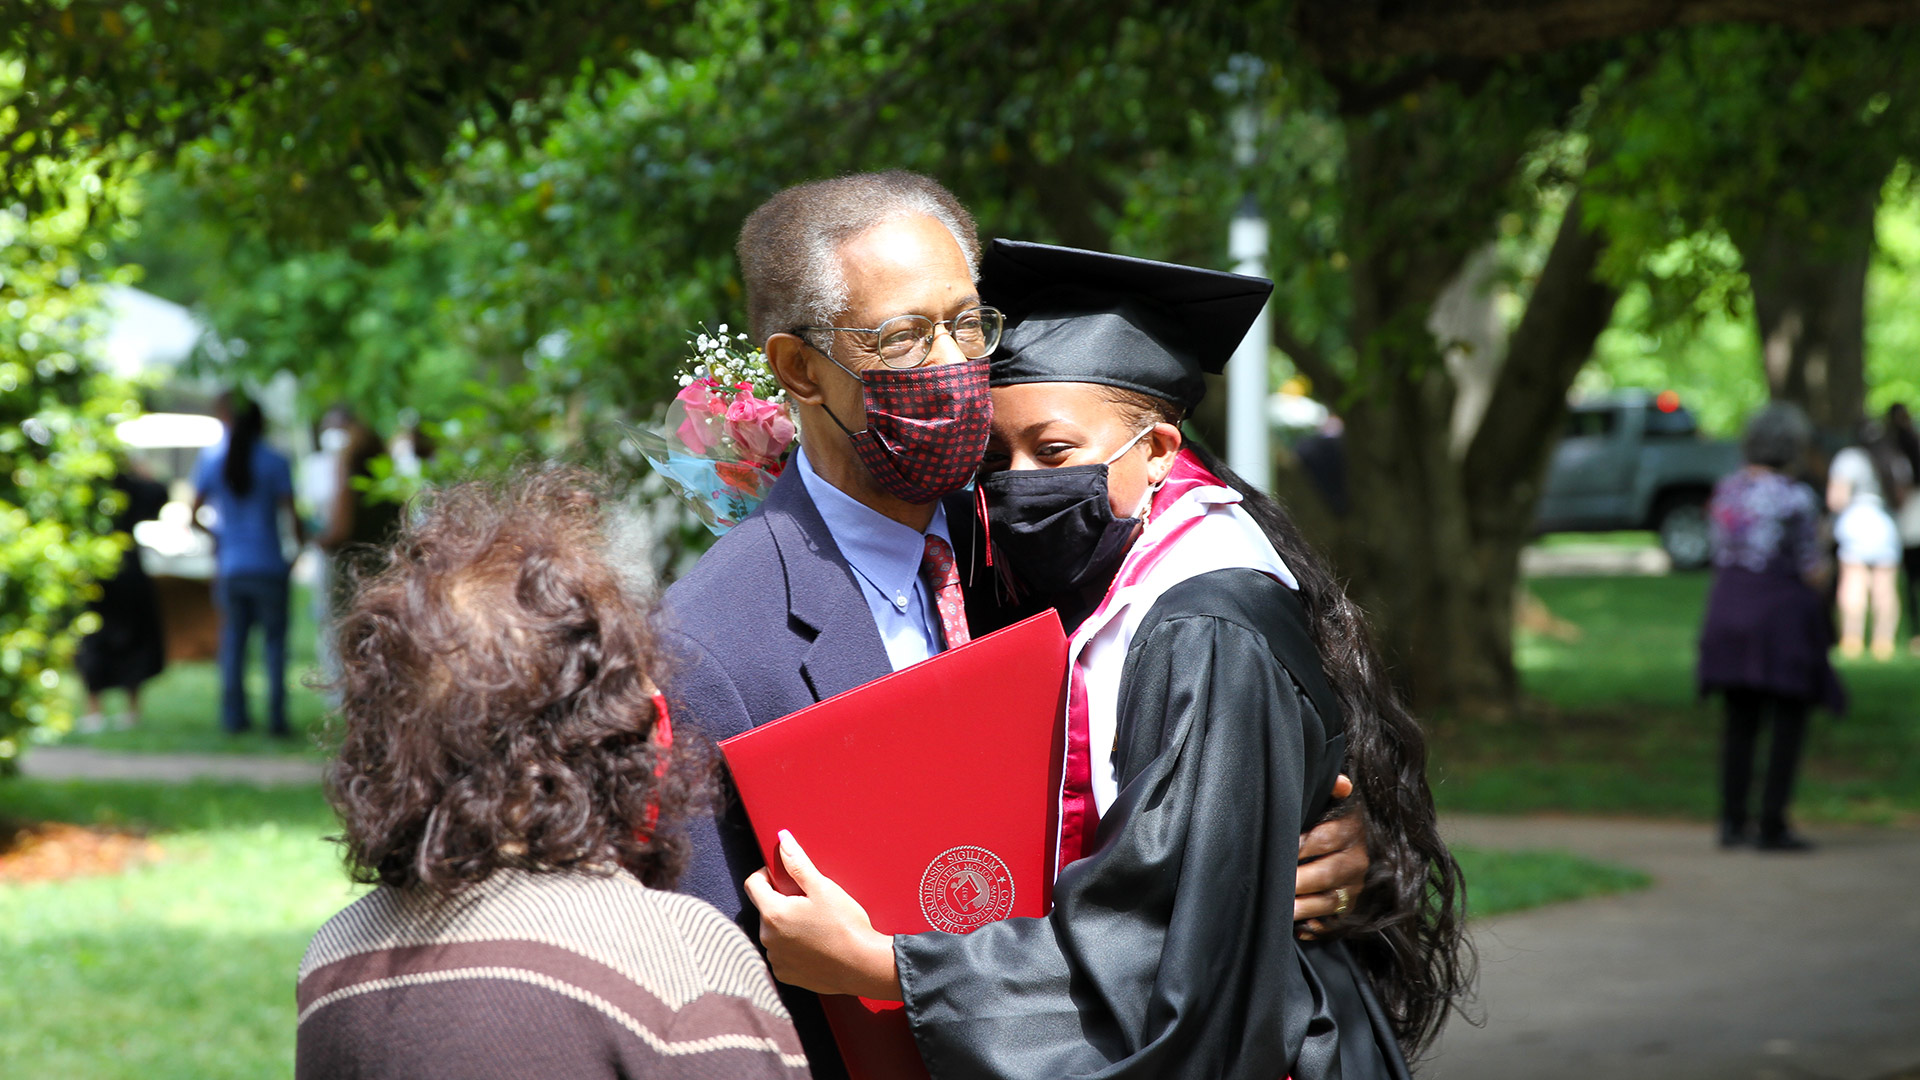 A student embraces a family member after Commencement.